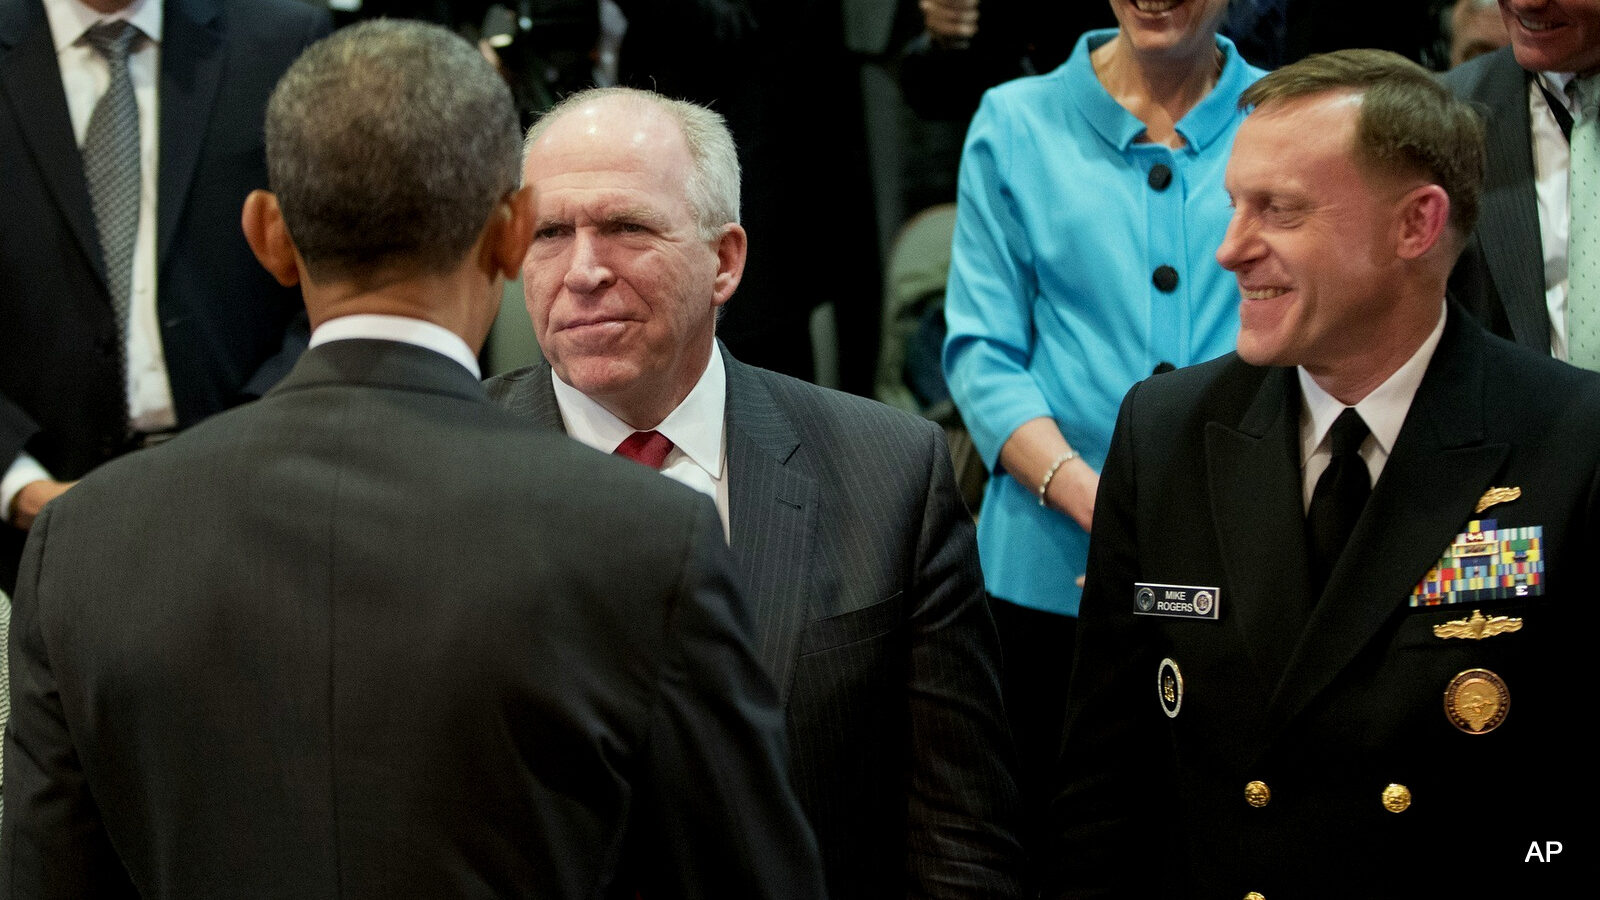 President Obama greets CIA Director John O. Brennan, center, and Navy Adm. Michael S. Rogers, director of the National Security Agency, in McLean, Va., on April 24.